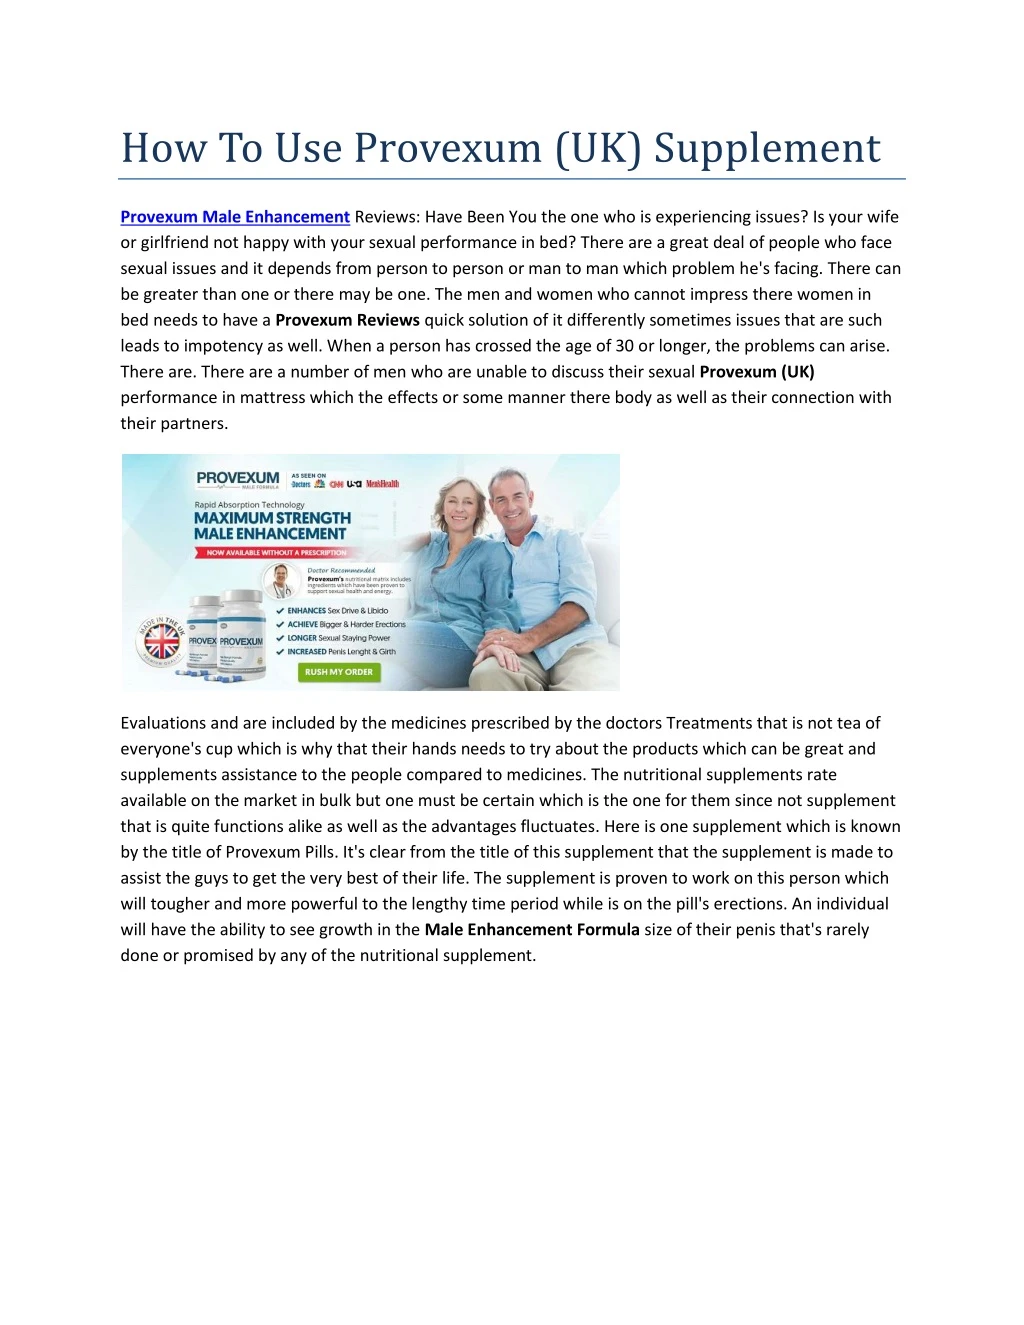 how to use provexum uk supplement